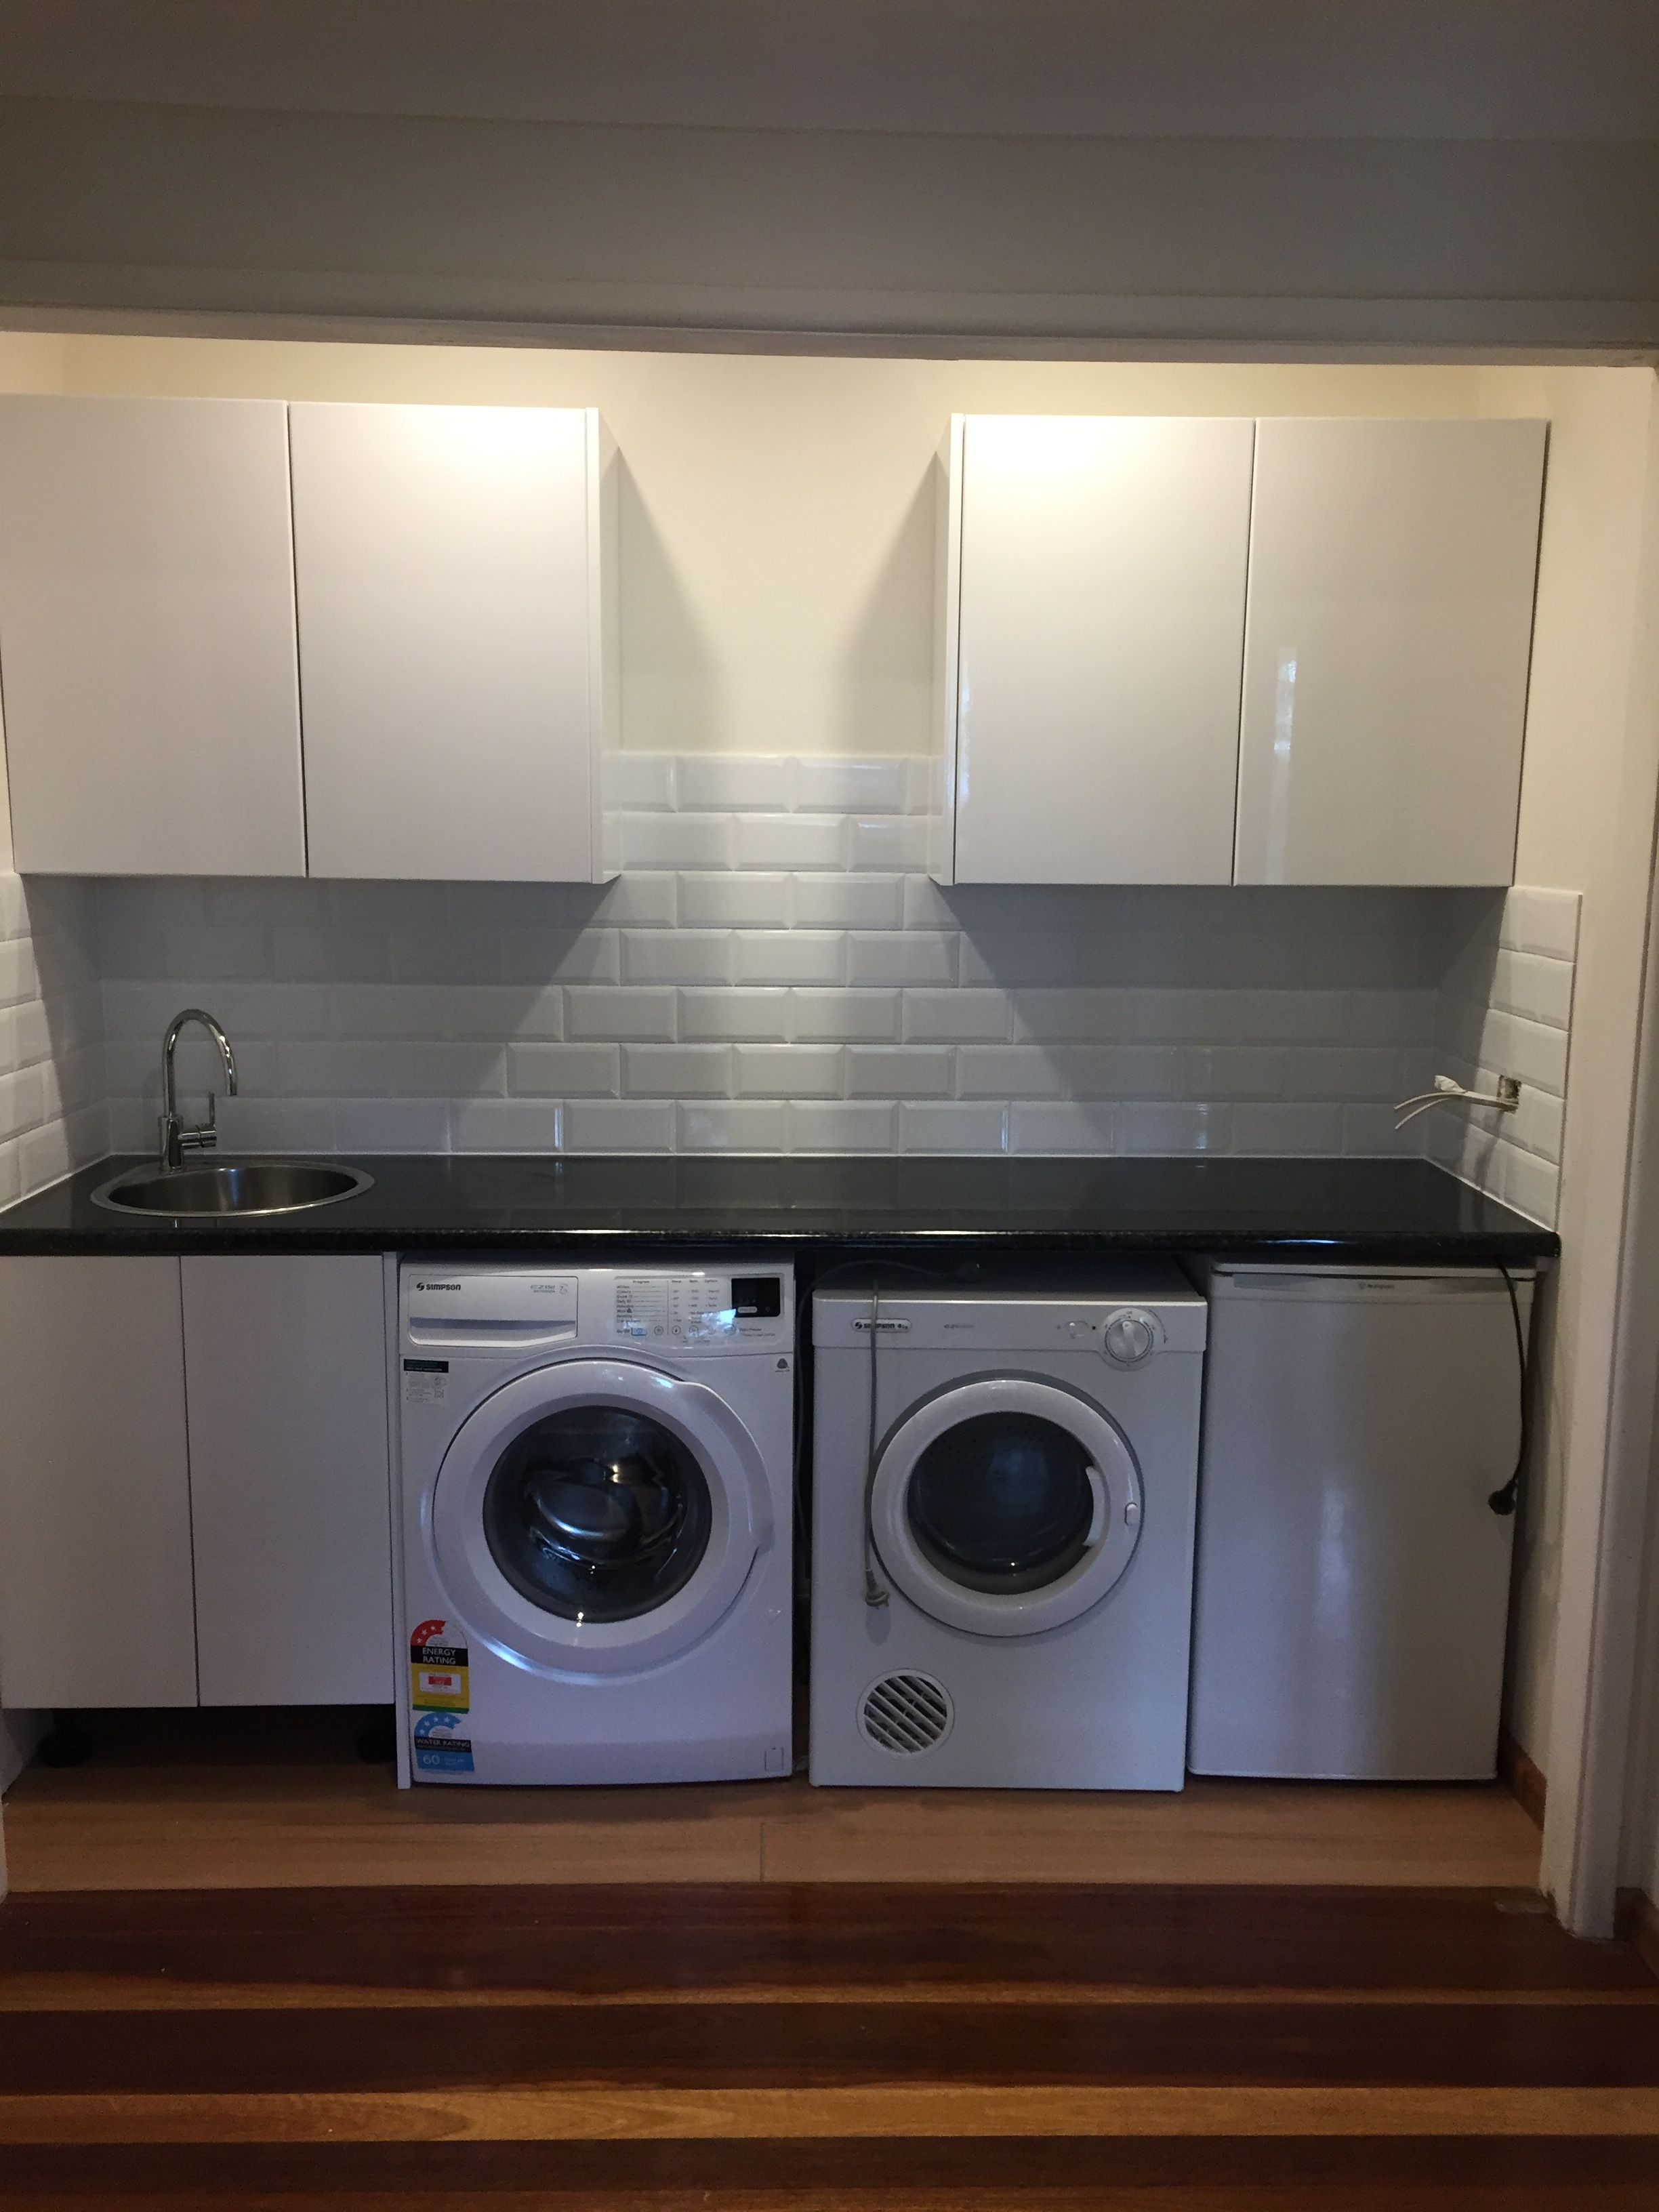 Laundry reno with built-in bar | Bunnings Workshop community